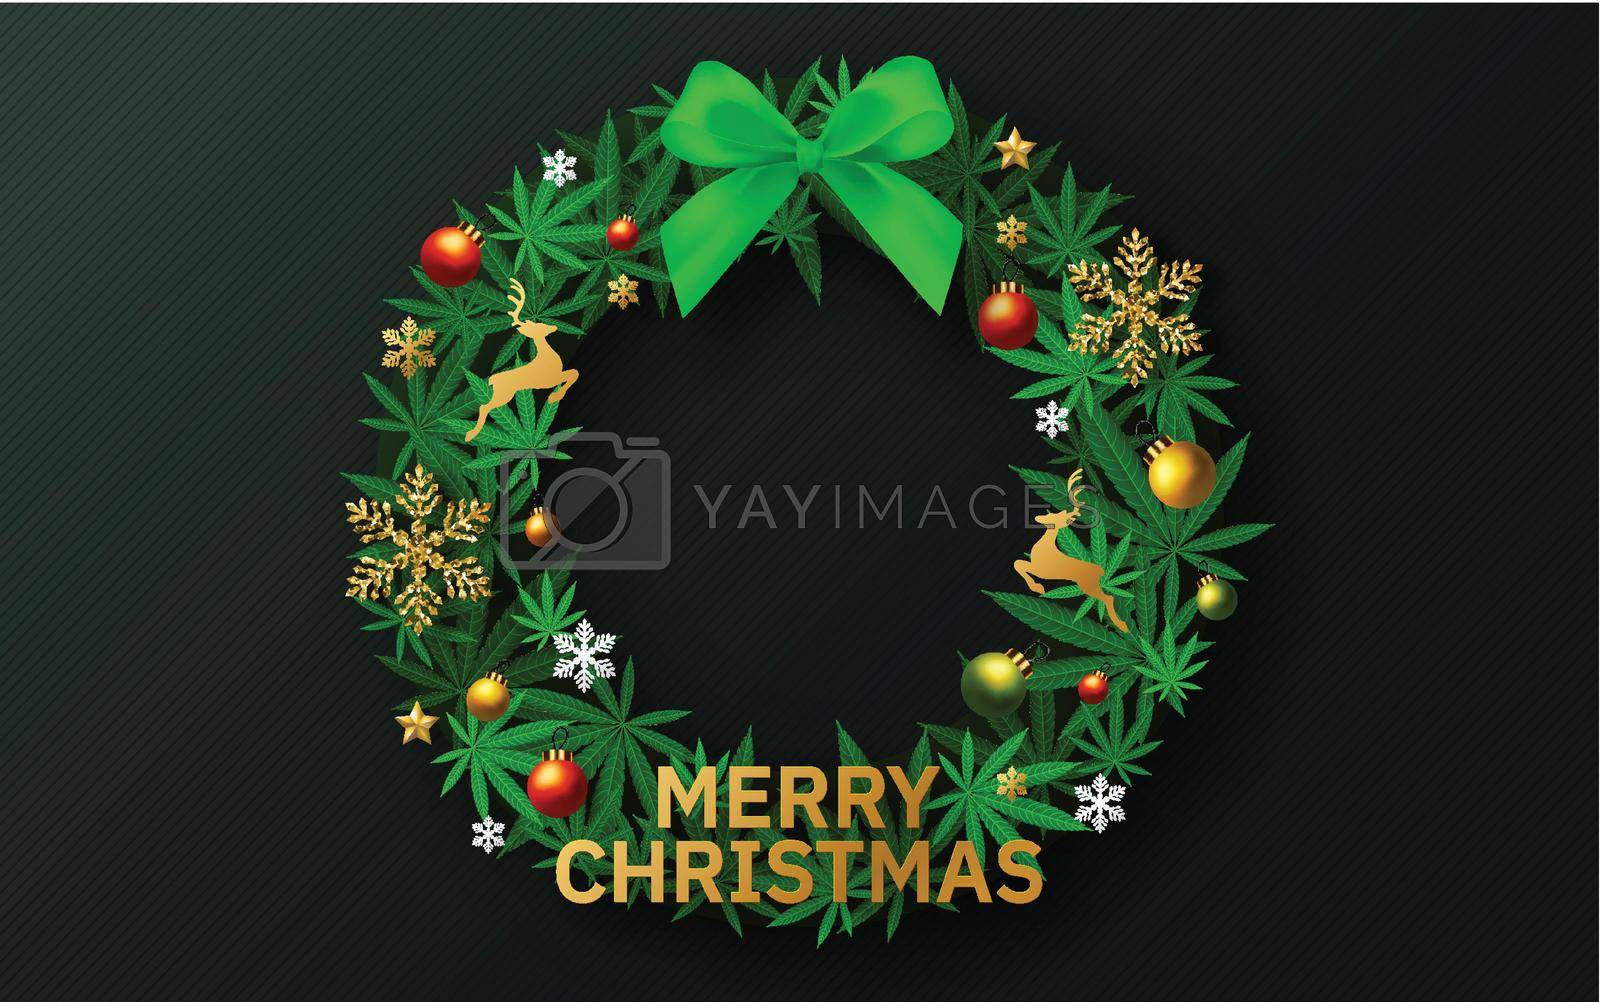 Royalty free image of Merry Christmas  cannabis marijuana plant greeting card elements paper cut with craft style on background. by SiamVector